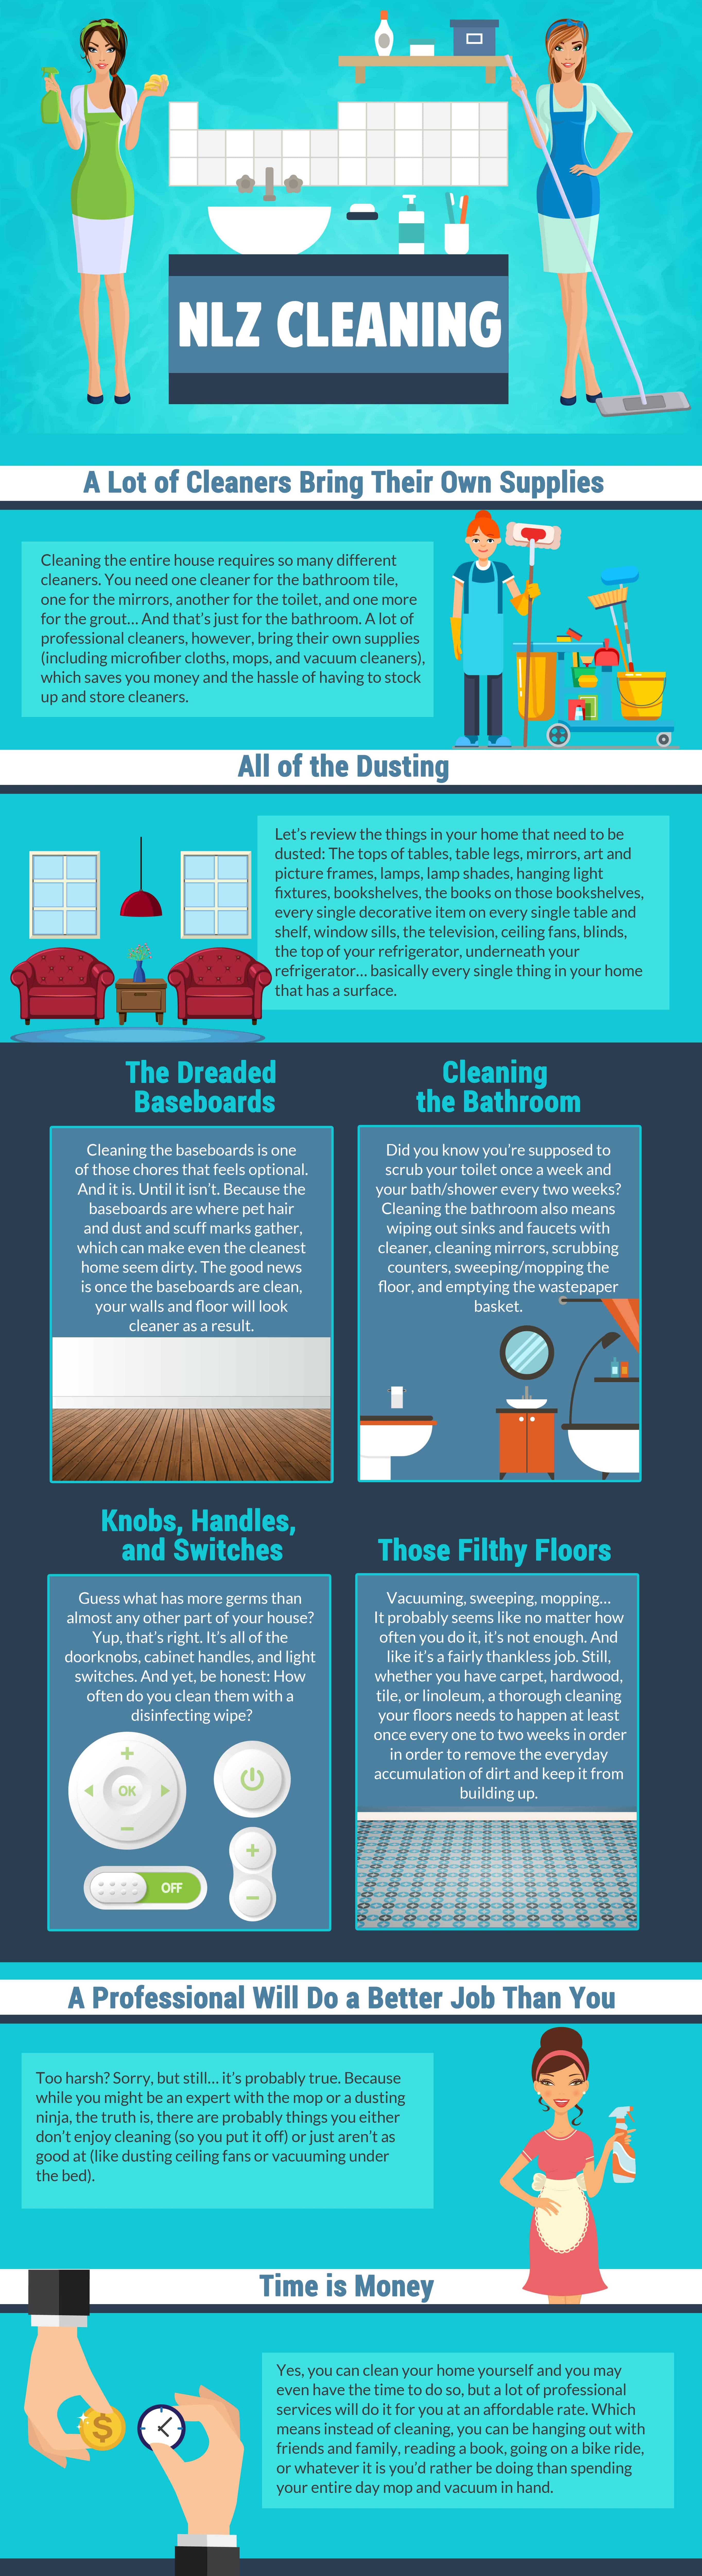 5 Things to Consider When Hiring House Cleaning Services